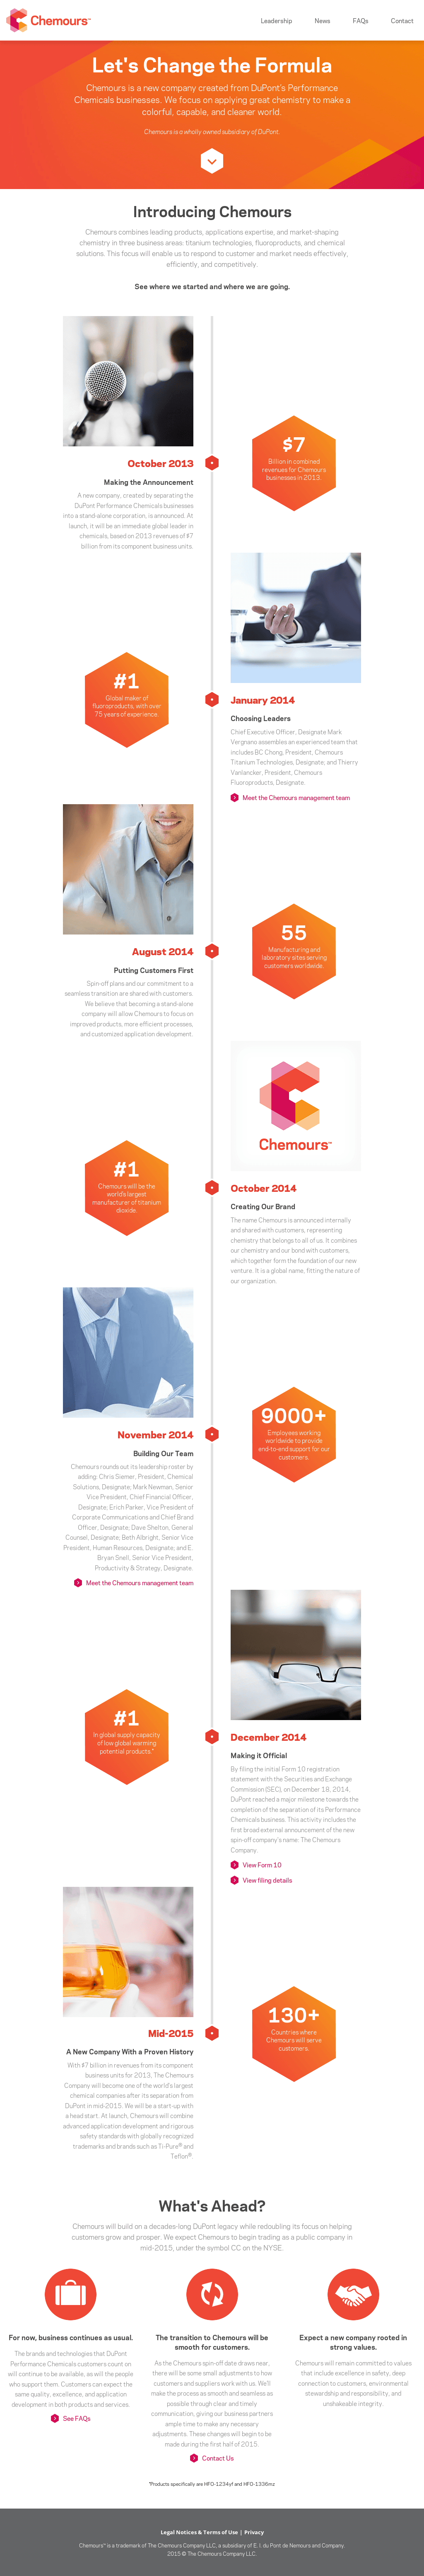 Chemours Logo - Chemours Competitors, Revenue and Employees - Owler Company Profile